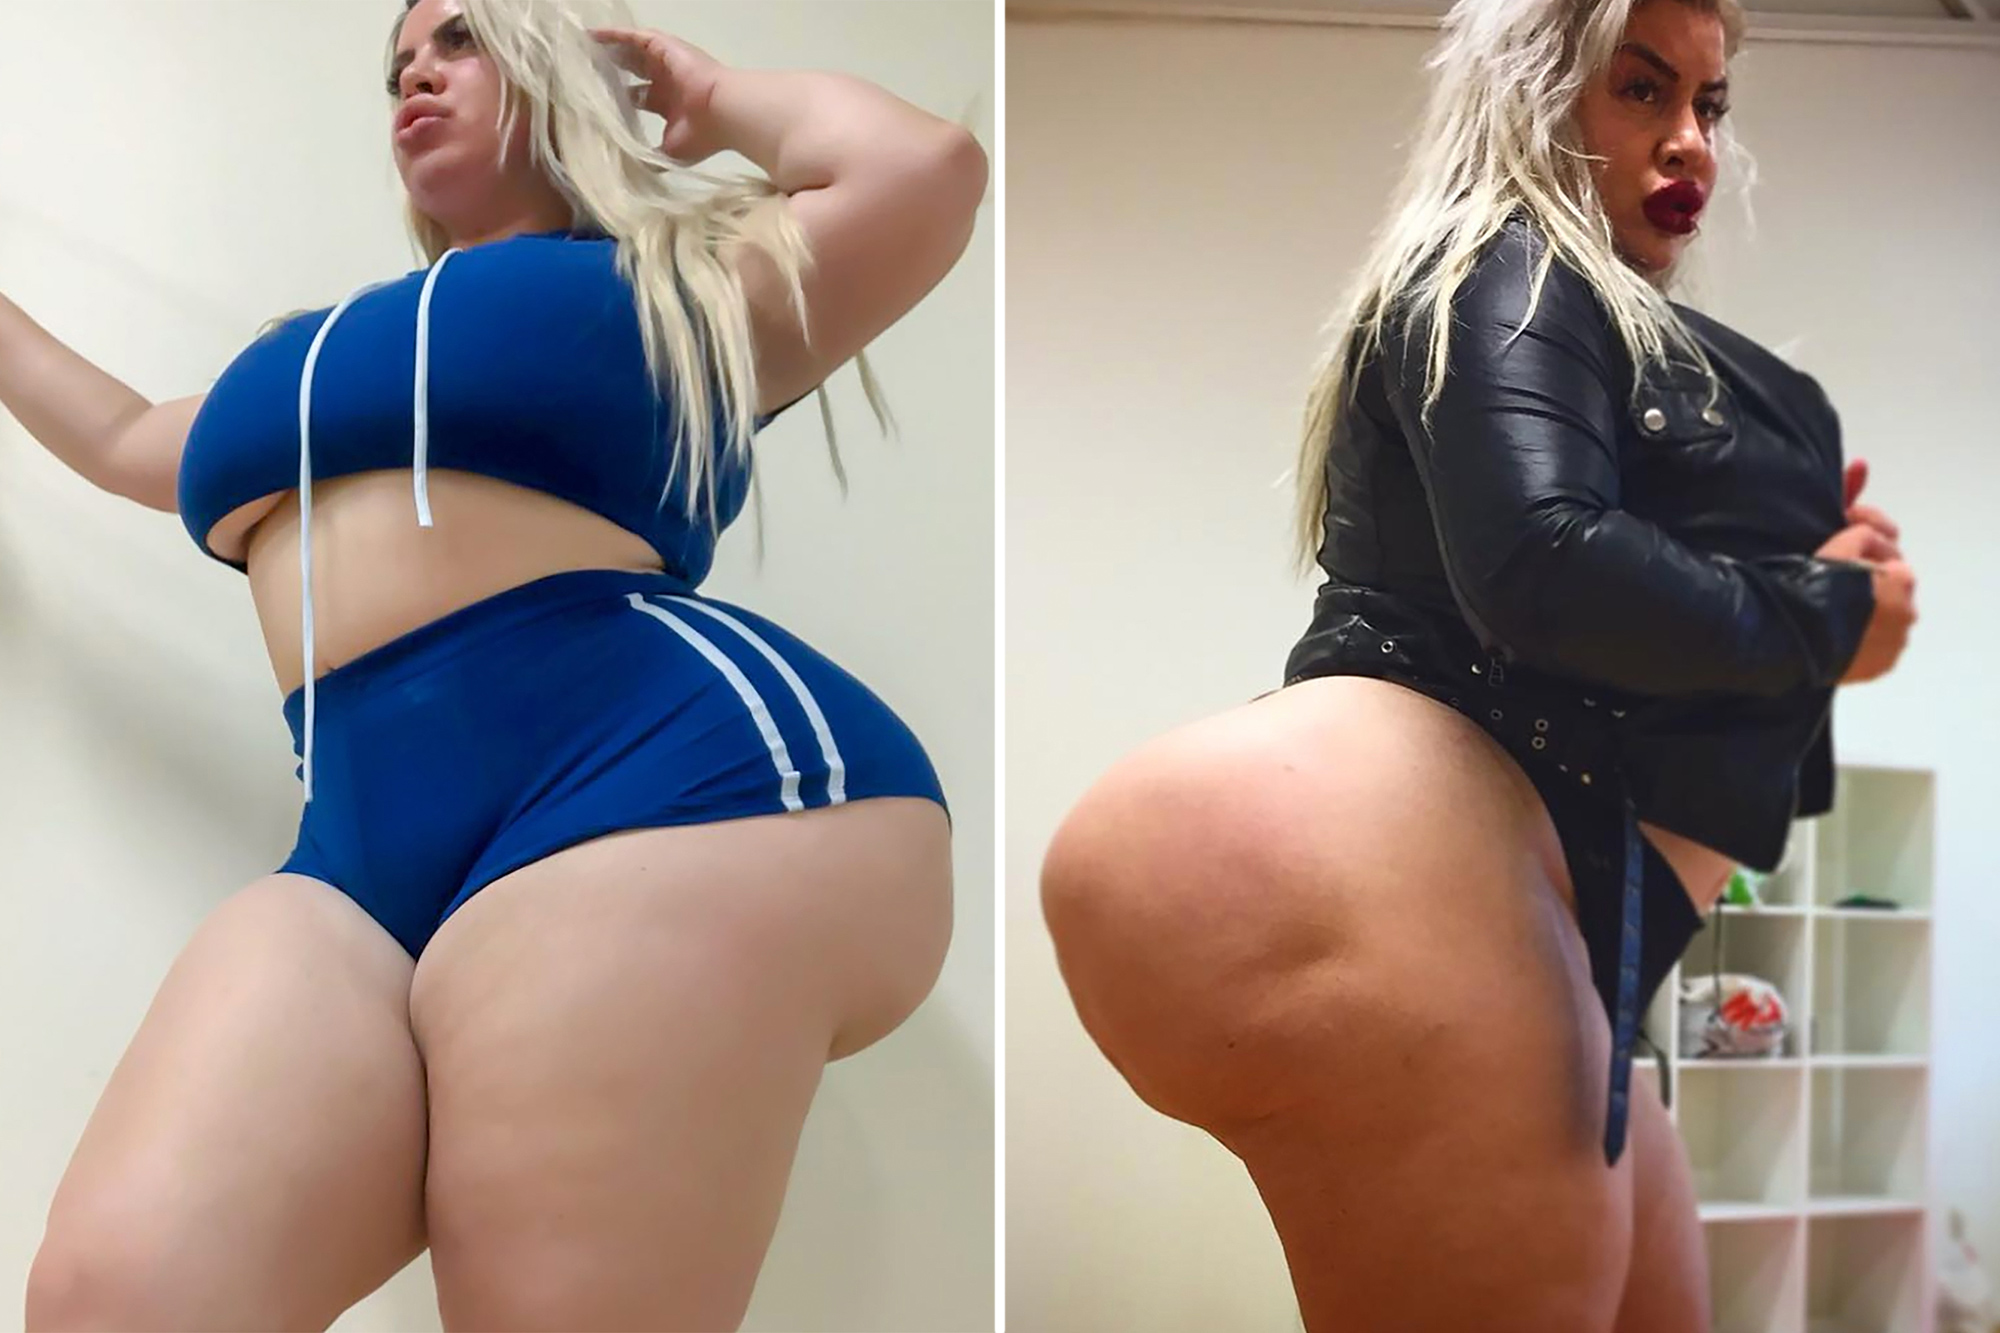 cristian costache recommends big phat white ass pic